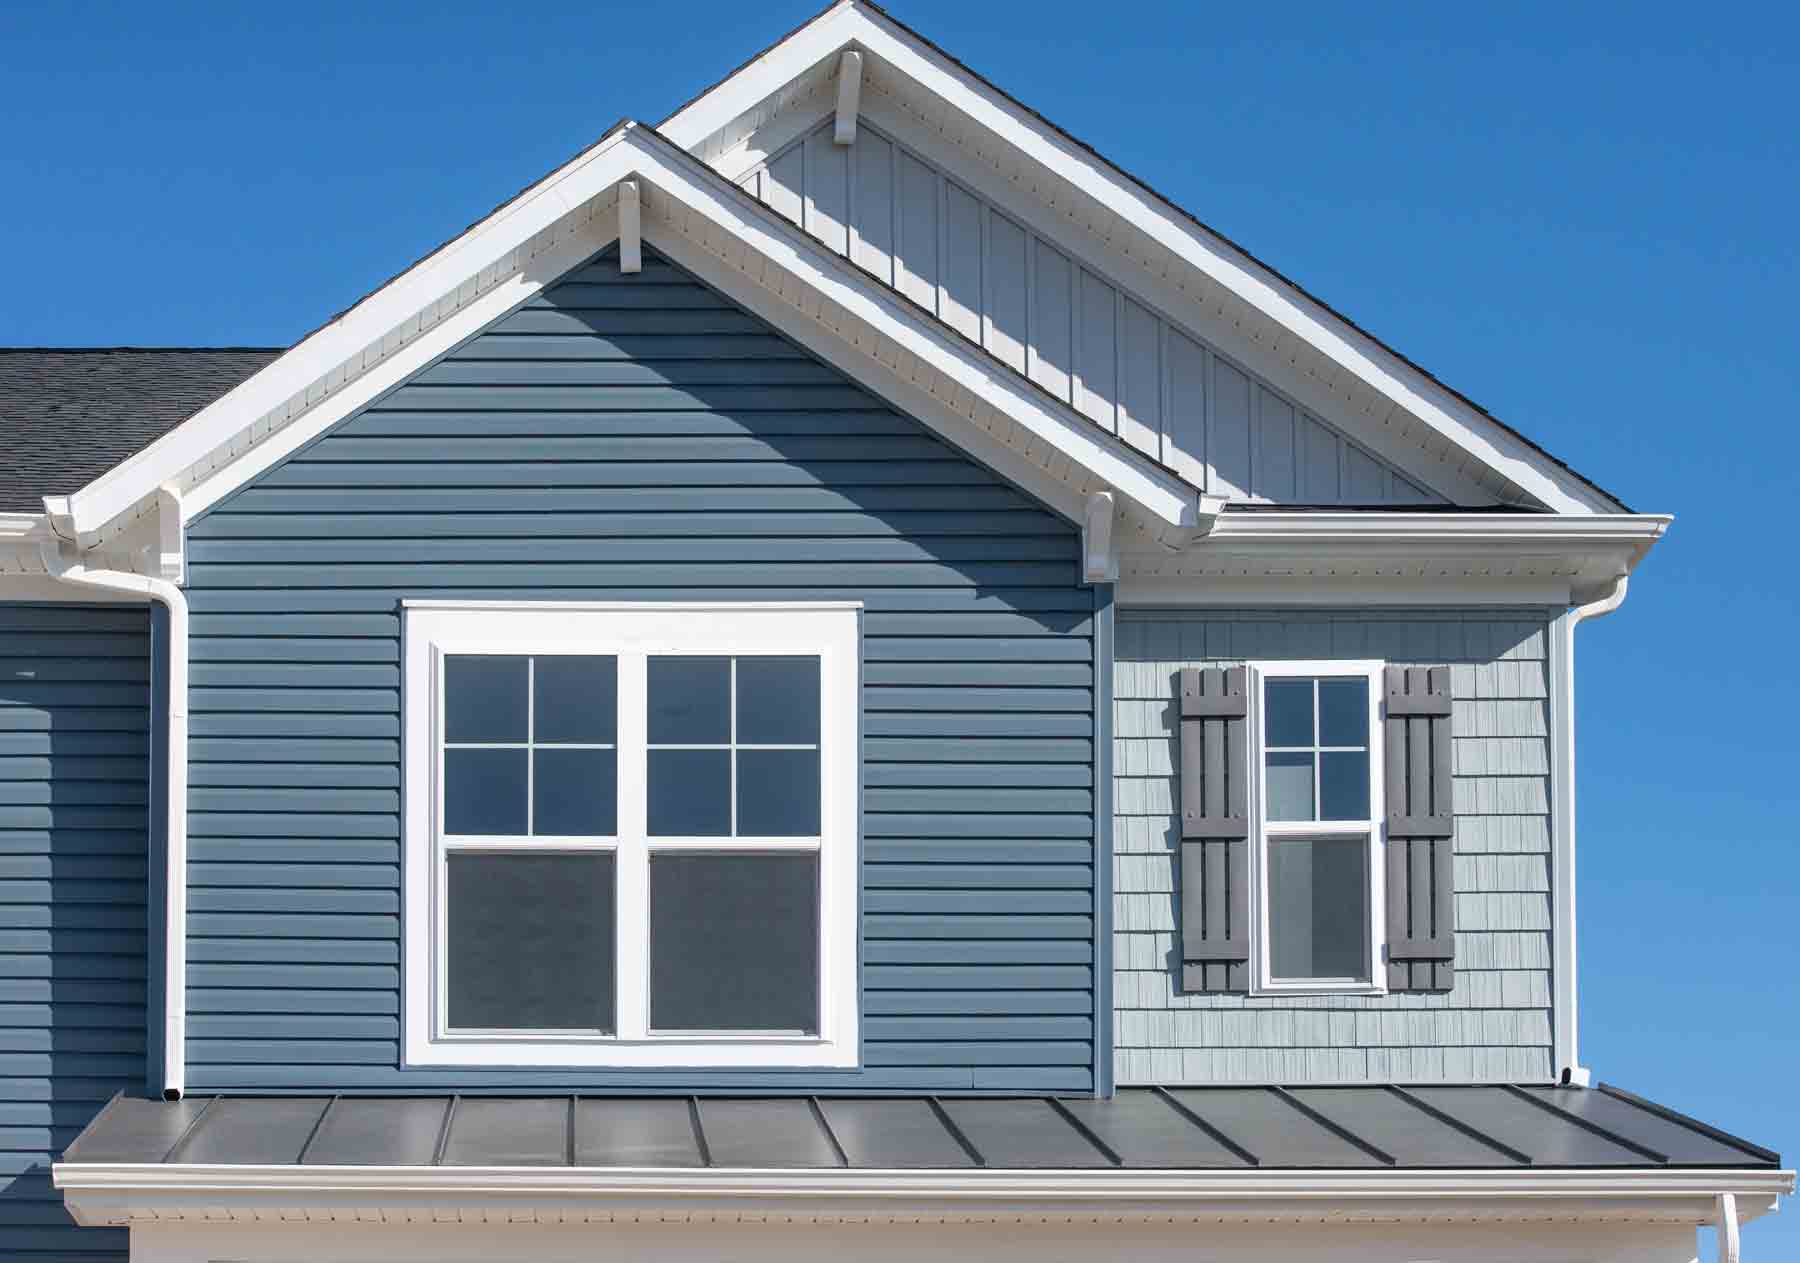 Find a siding contractor near you